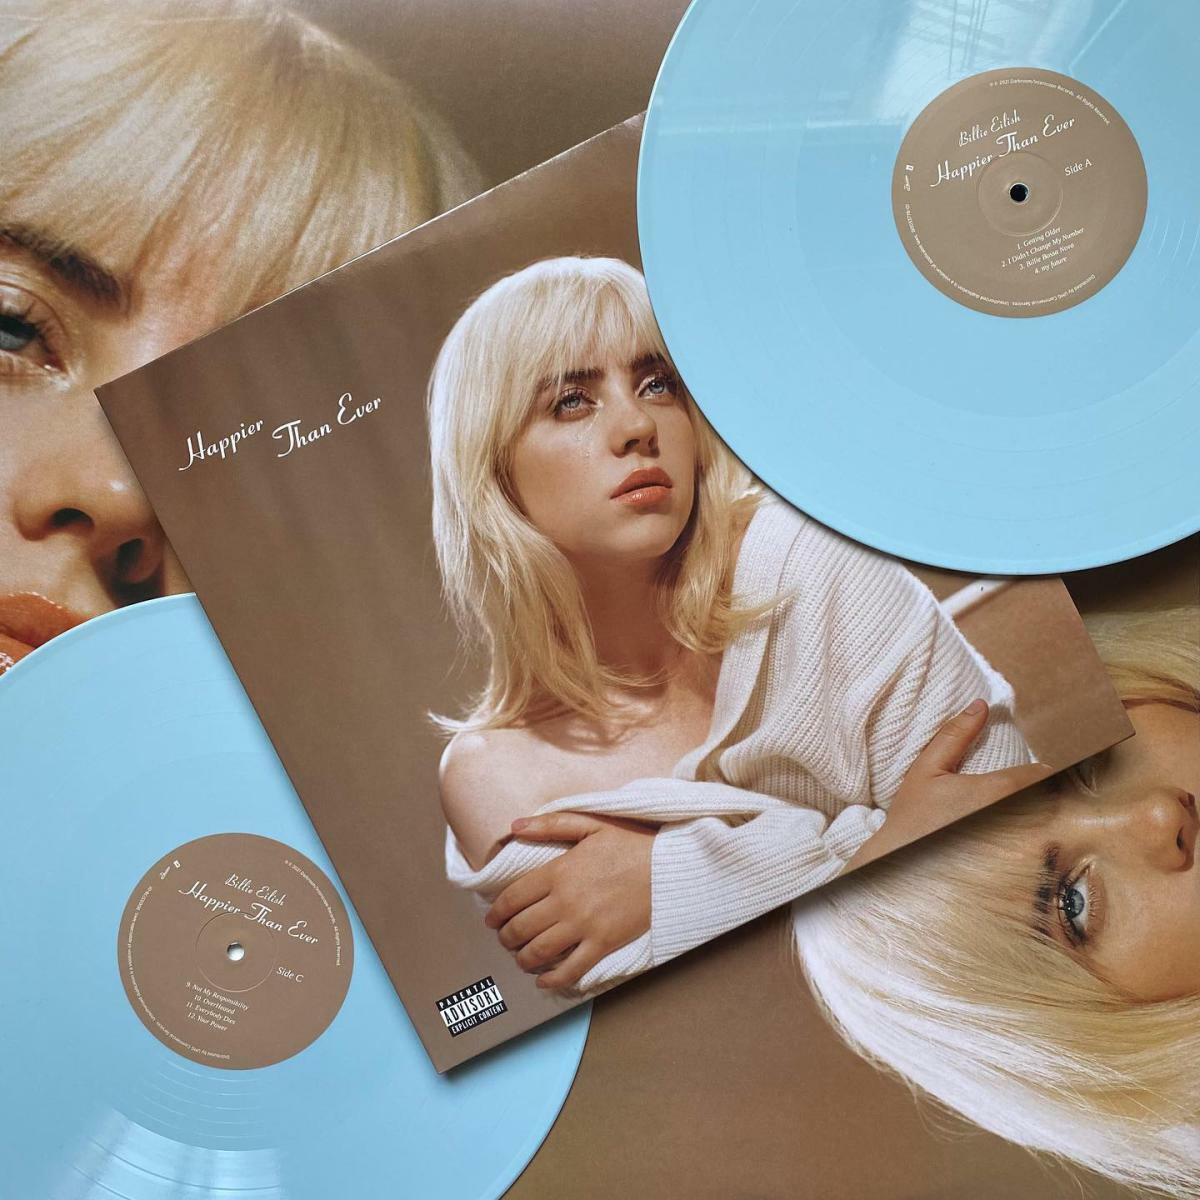 BILLIE EILISH HAPPIER THAN EVER VINYL NEW! LIMITED BLUE LP/POSTER THEREFORE  I AM